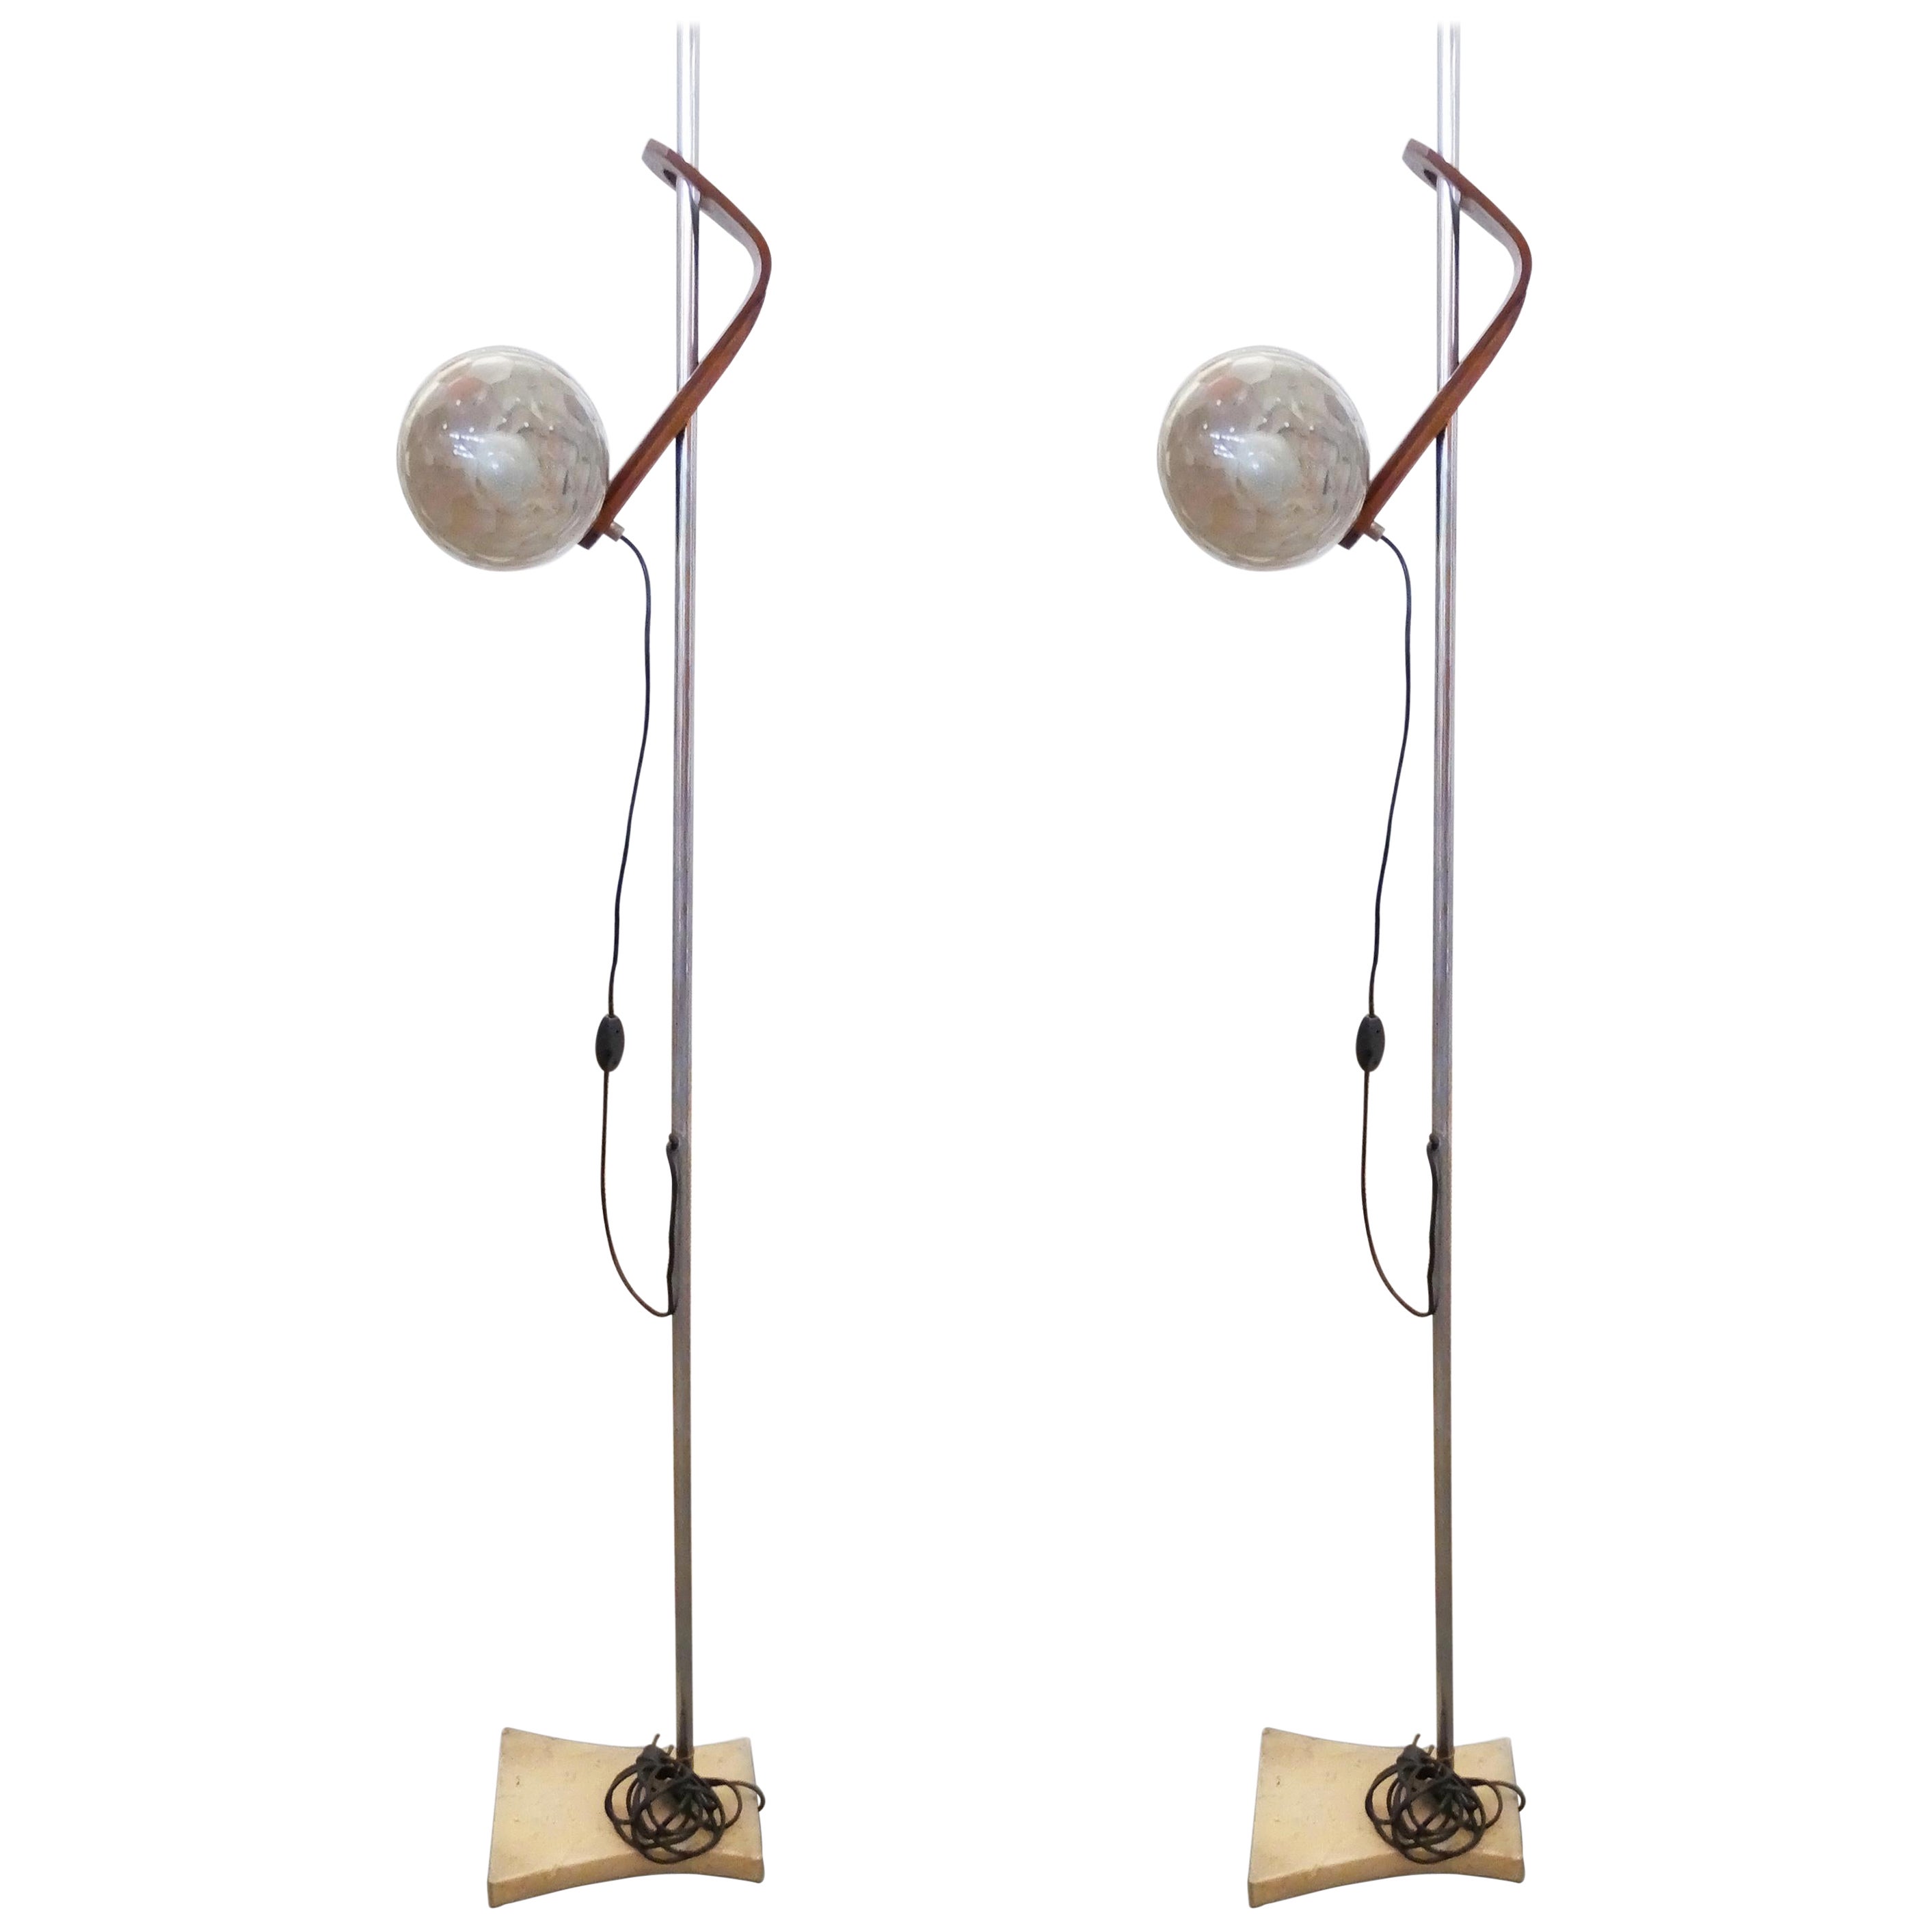 Set of Two Italian Mid-Century Modern Floor Lamps, circa 1950 For Sale